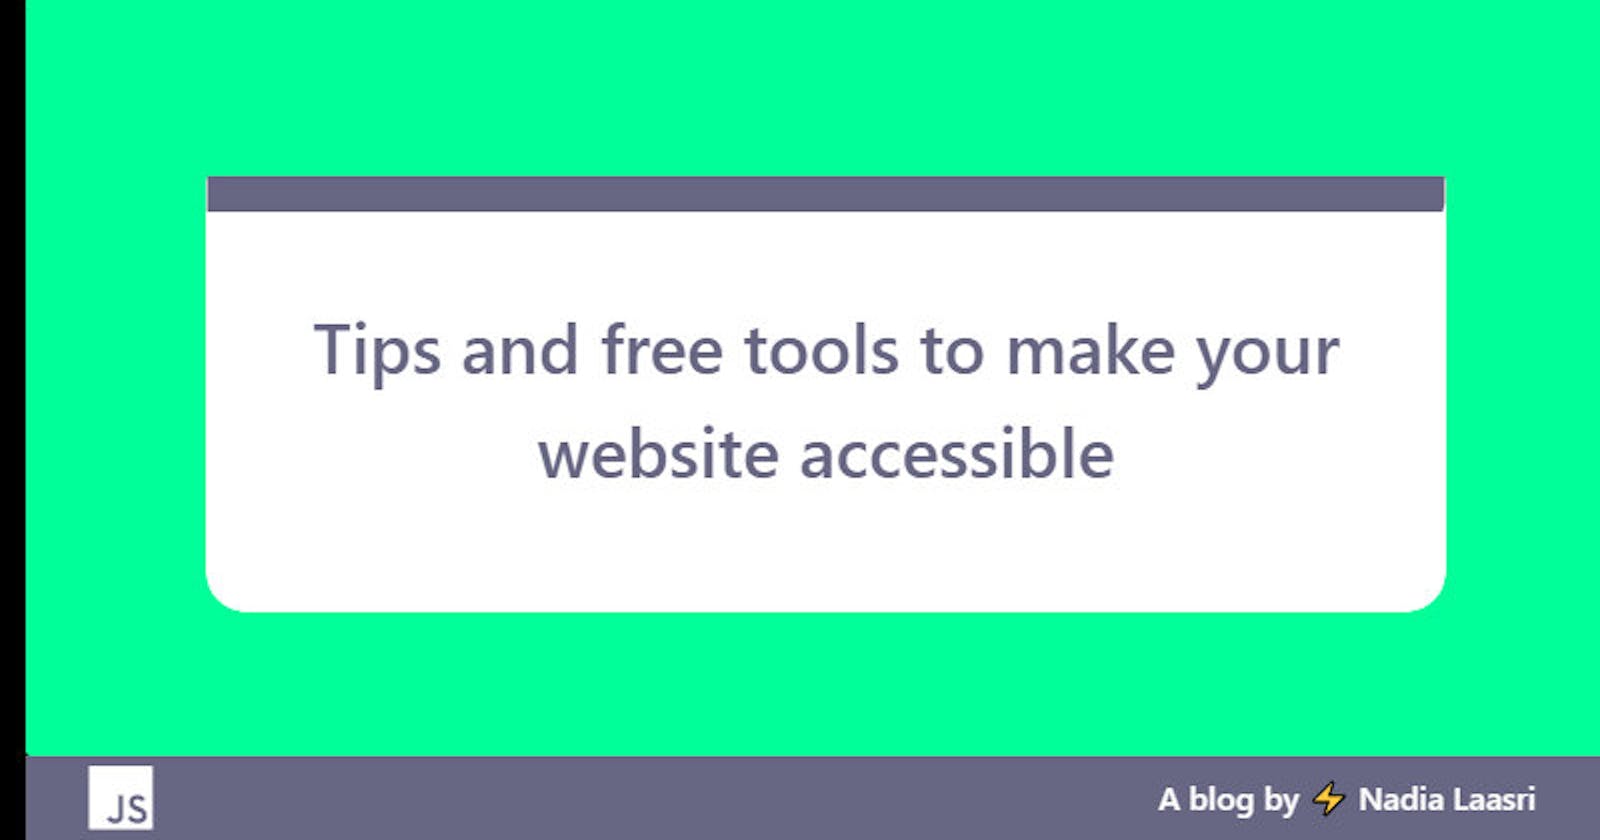 Tips and free tools to make your website accessible